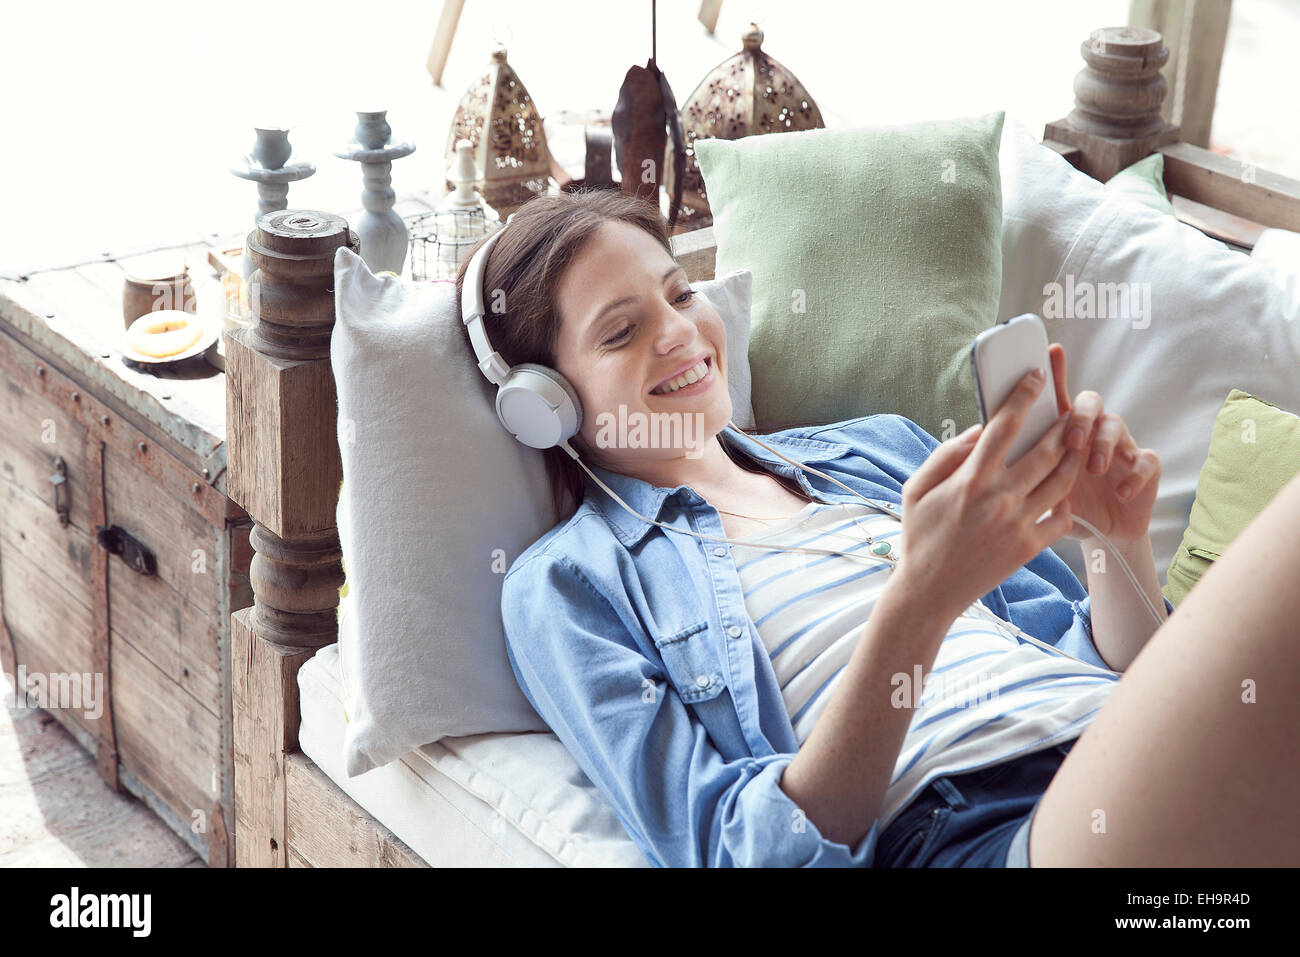 Young woman relaxing with smartphone and headphones Stock Photo